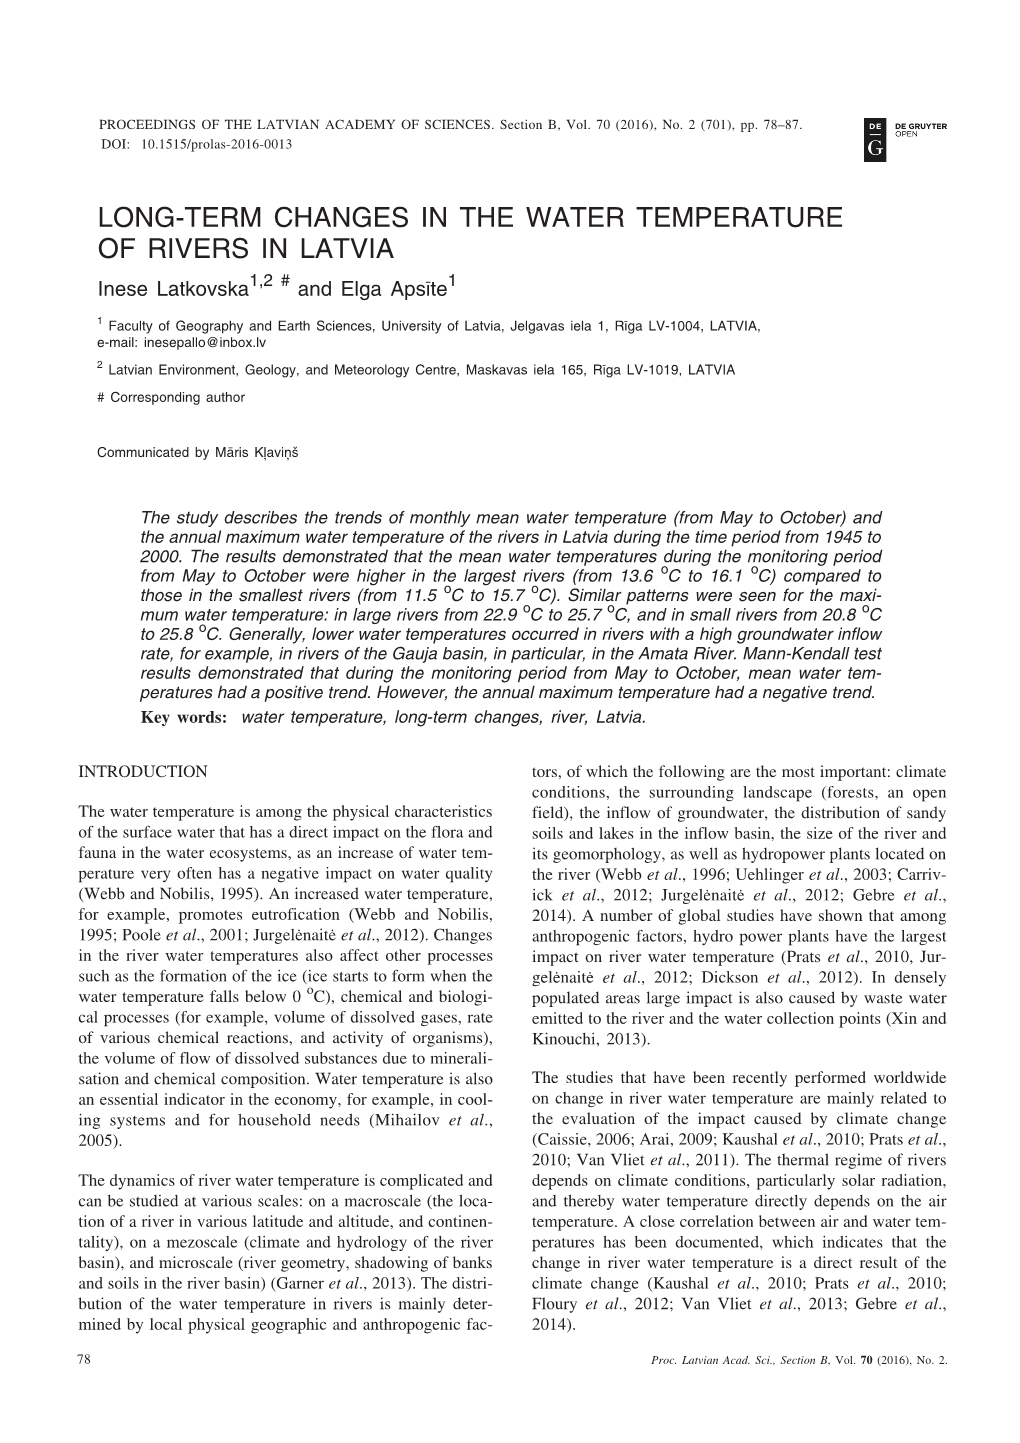 LONG-TERM CHANGES in the WATER TEMPERATURE of RIVERS in LATVIA Inese Latkovska1,2 # and Elga Apsîte1